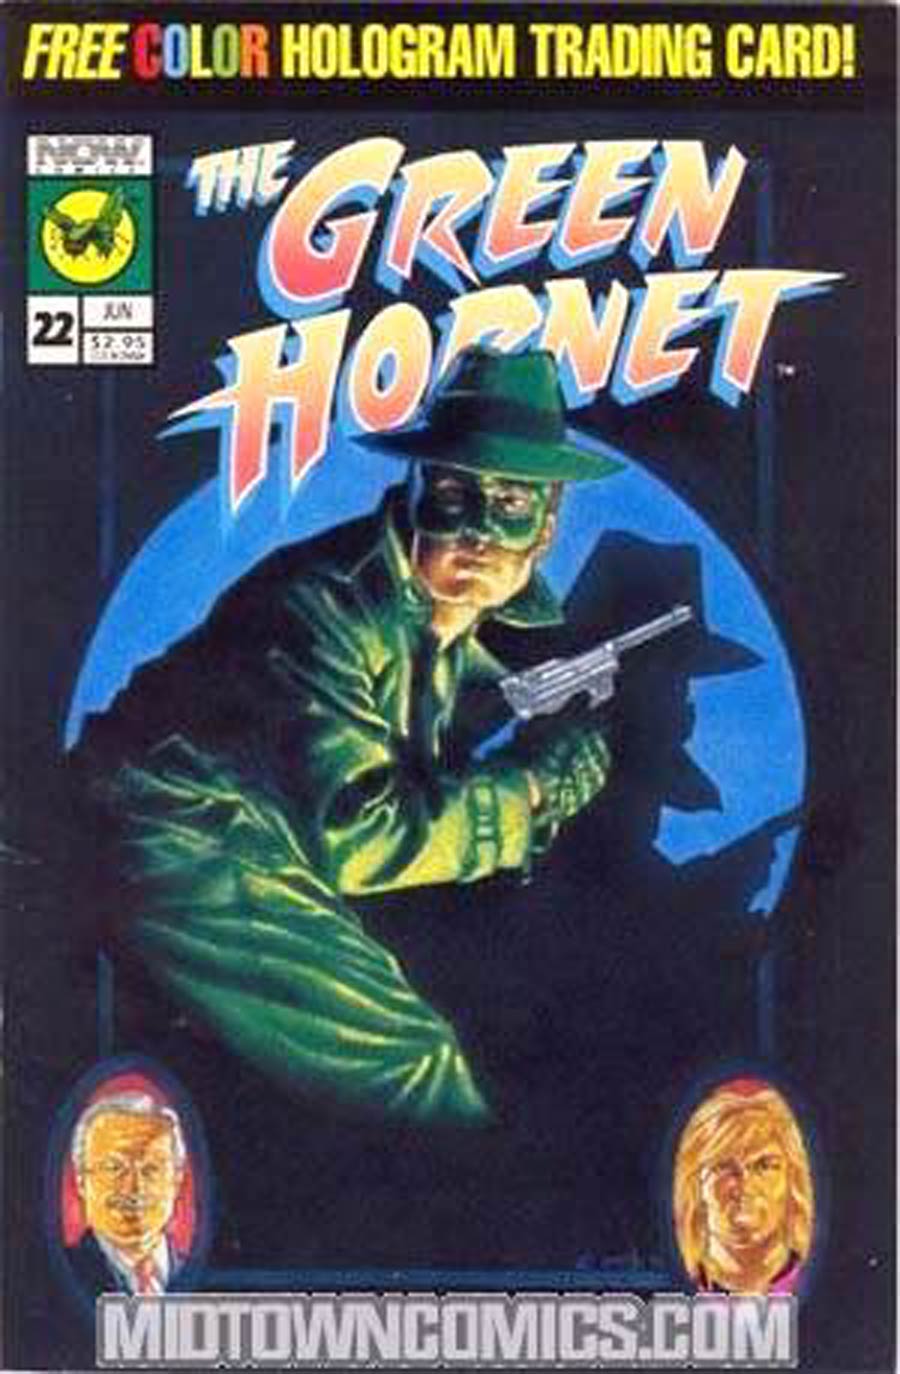 Green Hornet Vol 3 #22 Cover B Without Polybag